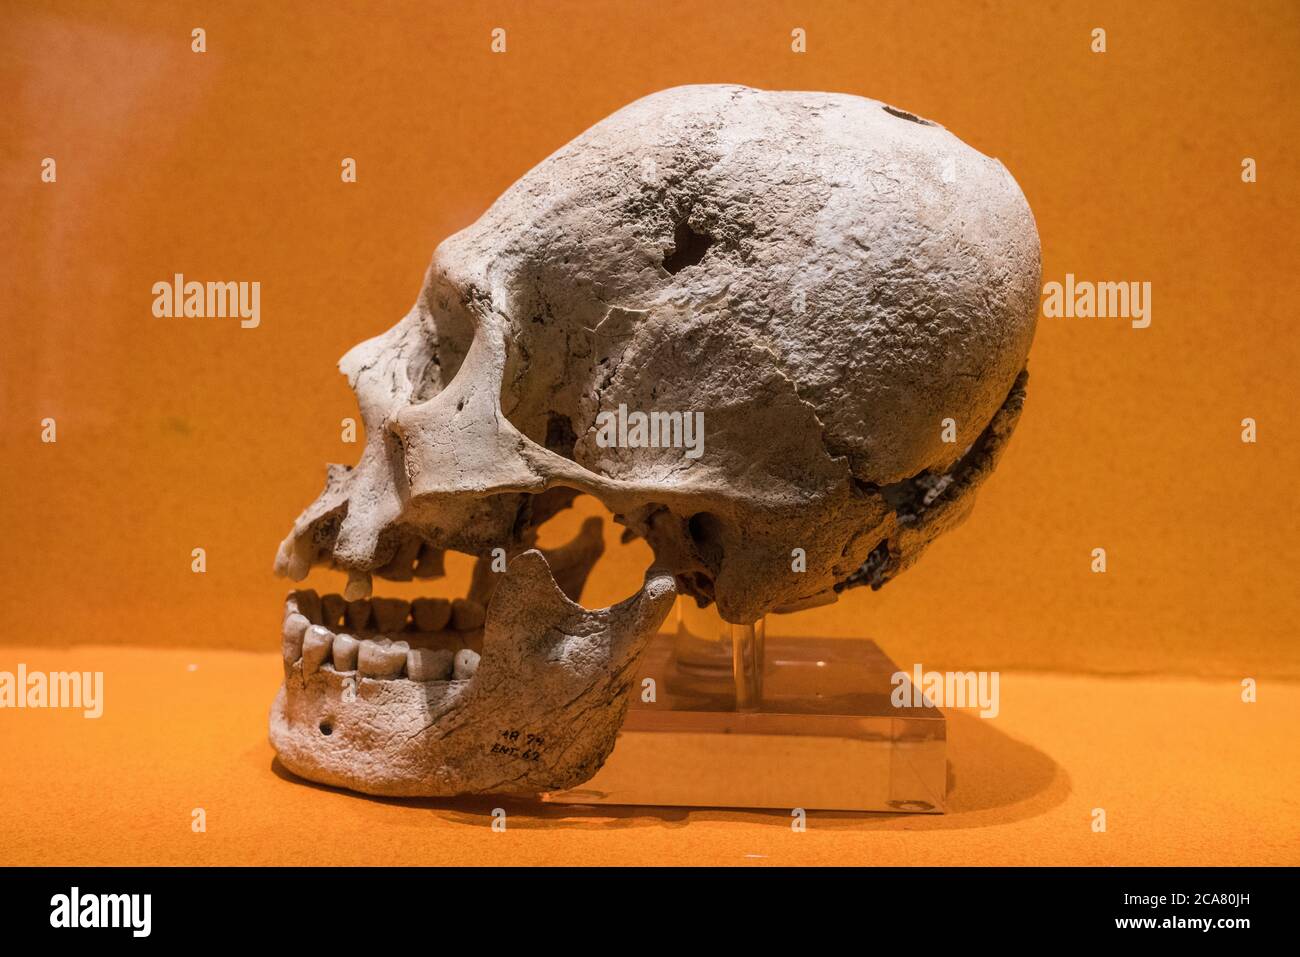 A skull from the ruins of Monte Alban showing cranial deformation and trepanation surgery.  Monte Alban Site Museum, Oaxaca, Mexico.  A UNESCO World H Stock Photo